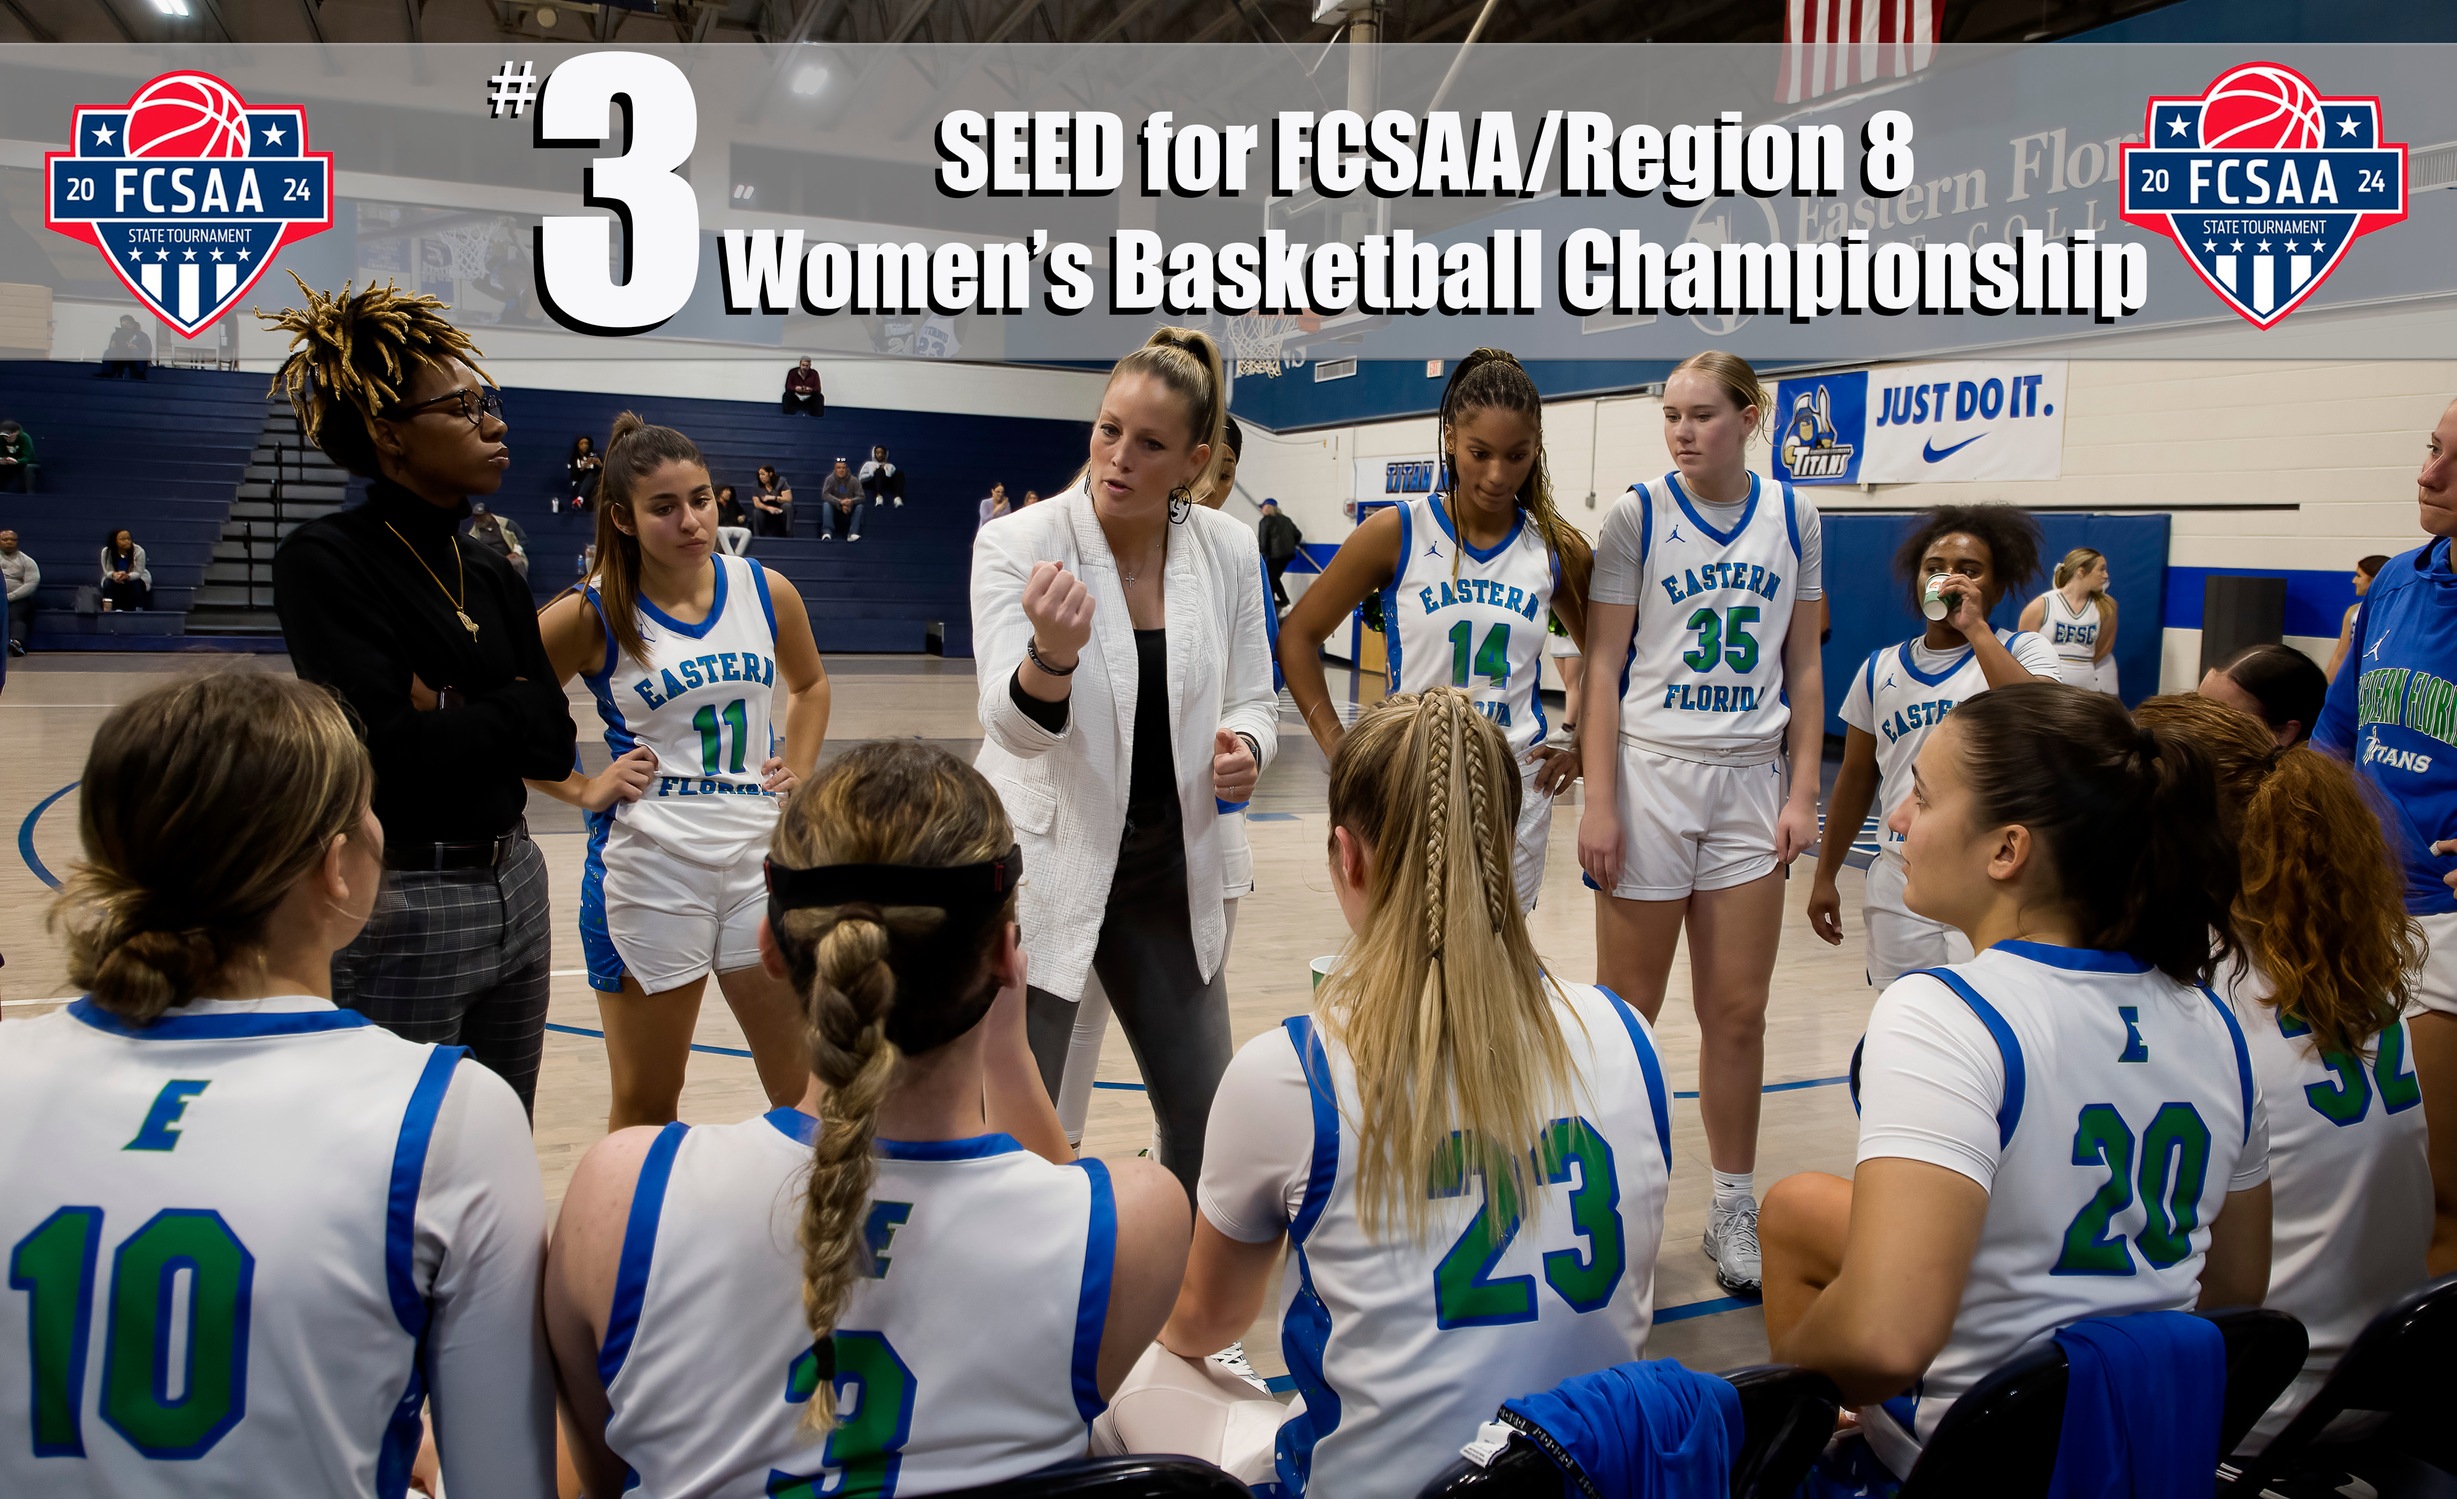 Women's basketball team No. 3 seed for state tournament